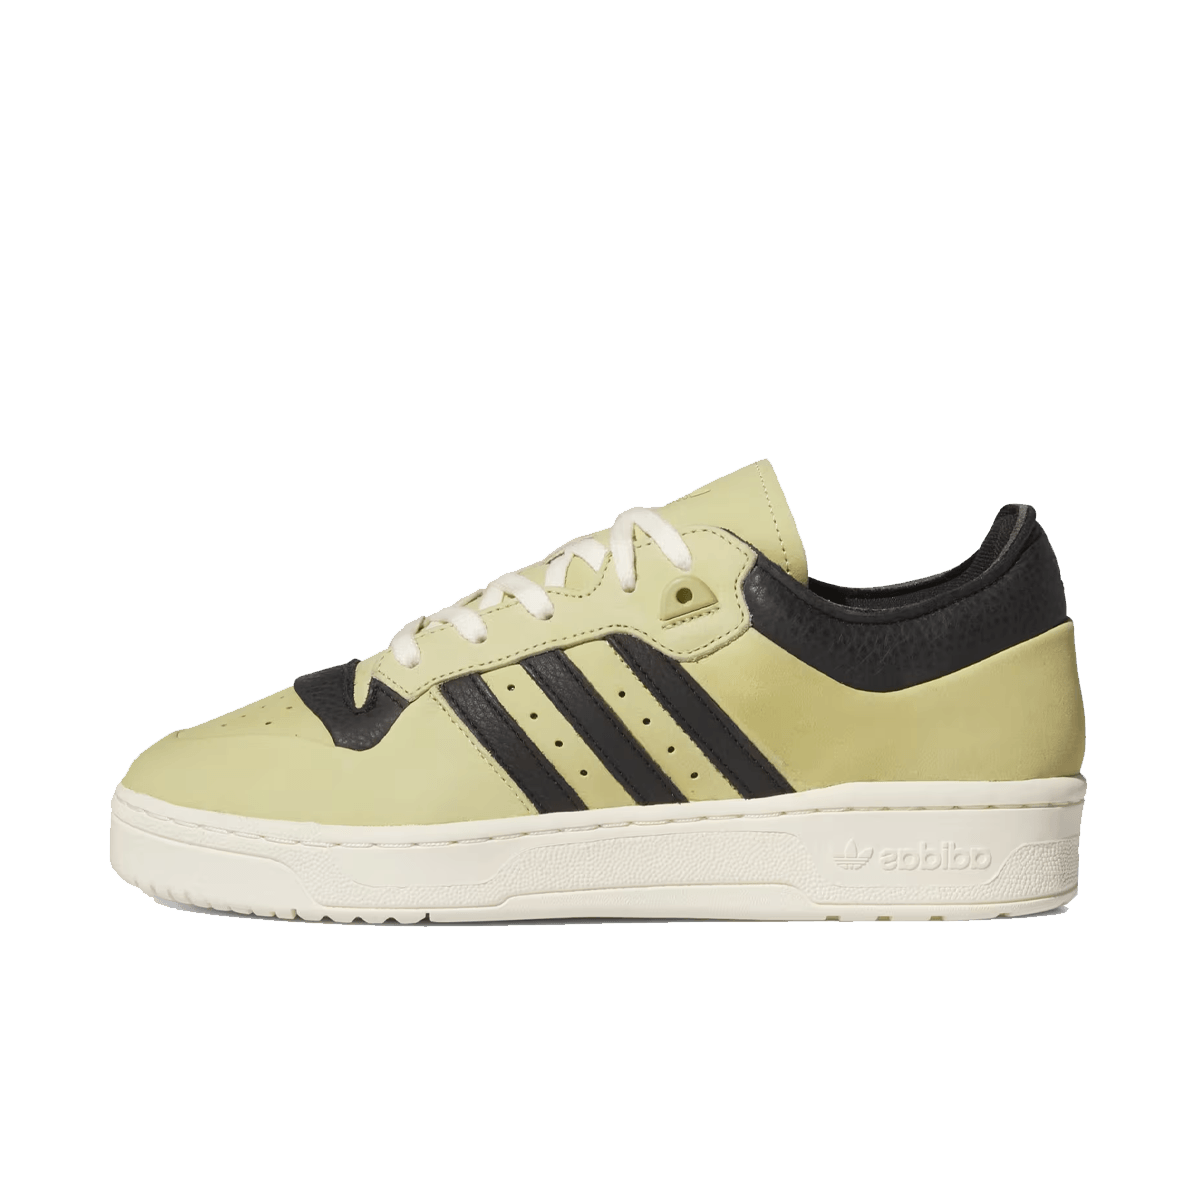 adidas Rivalry 86 Low 001 'Halo Gold' ID8252